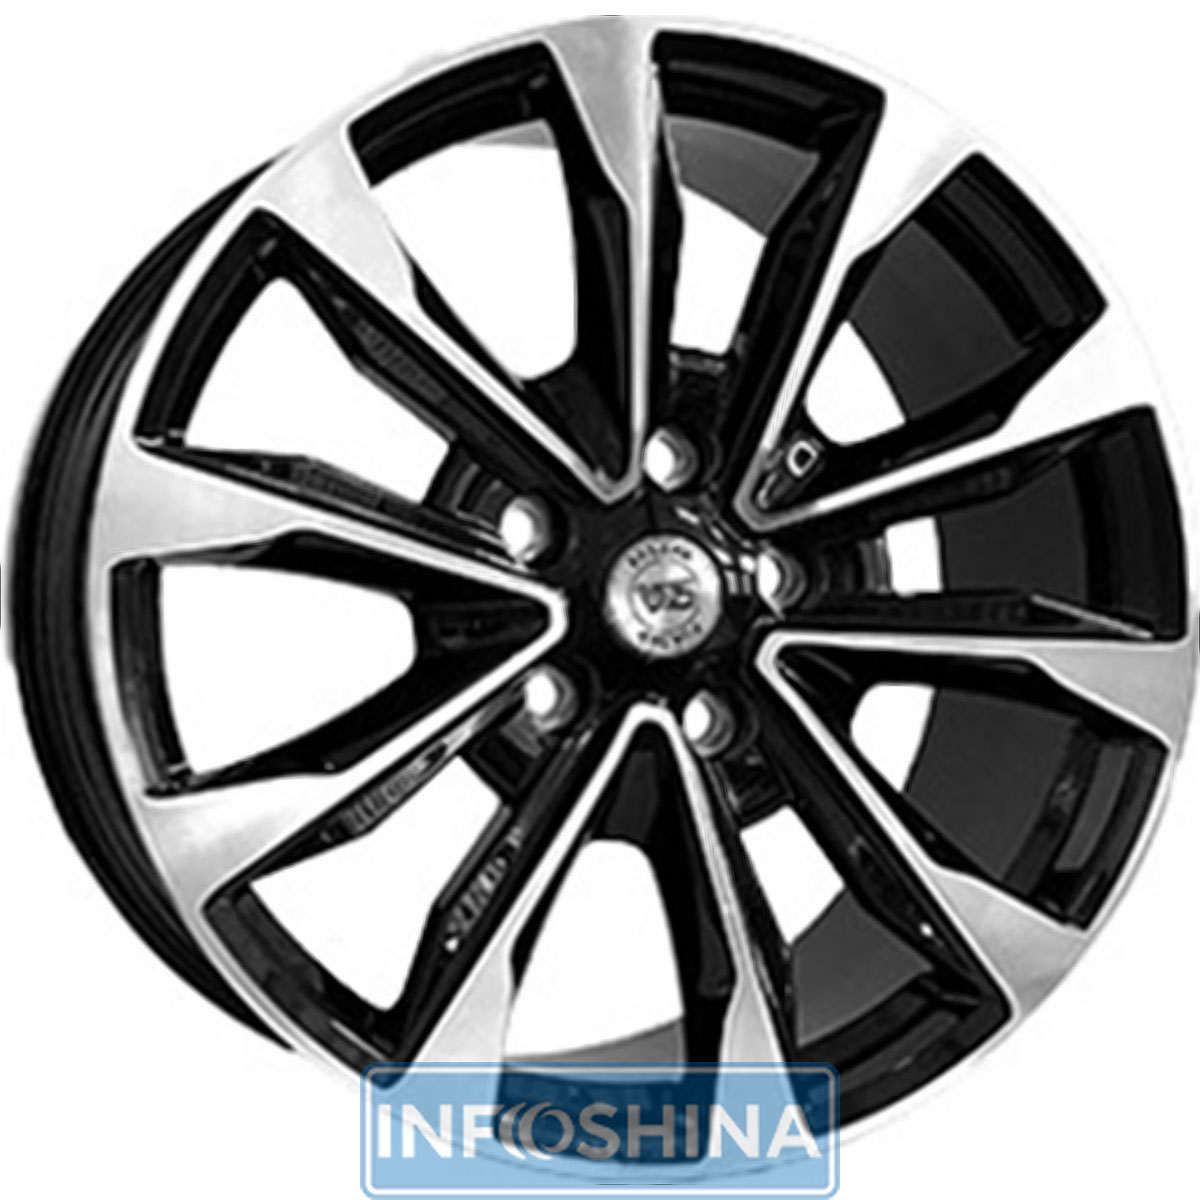 Купить диски WS Forged WS2155 Gloss Black With Machined Face R22 W9 PCD5x150 ET50 DIA110.1